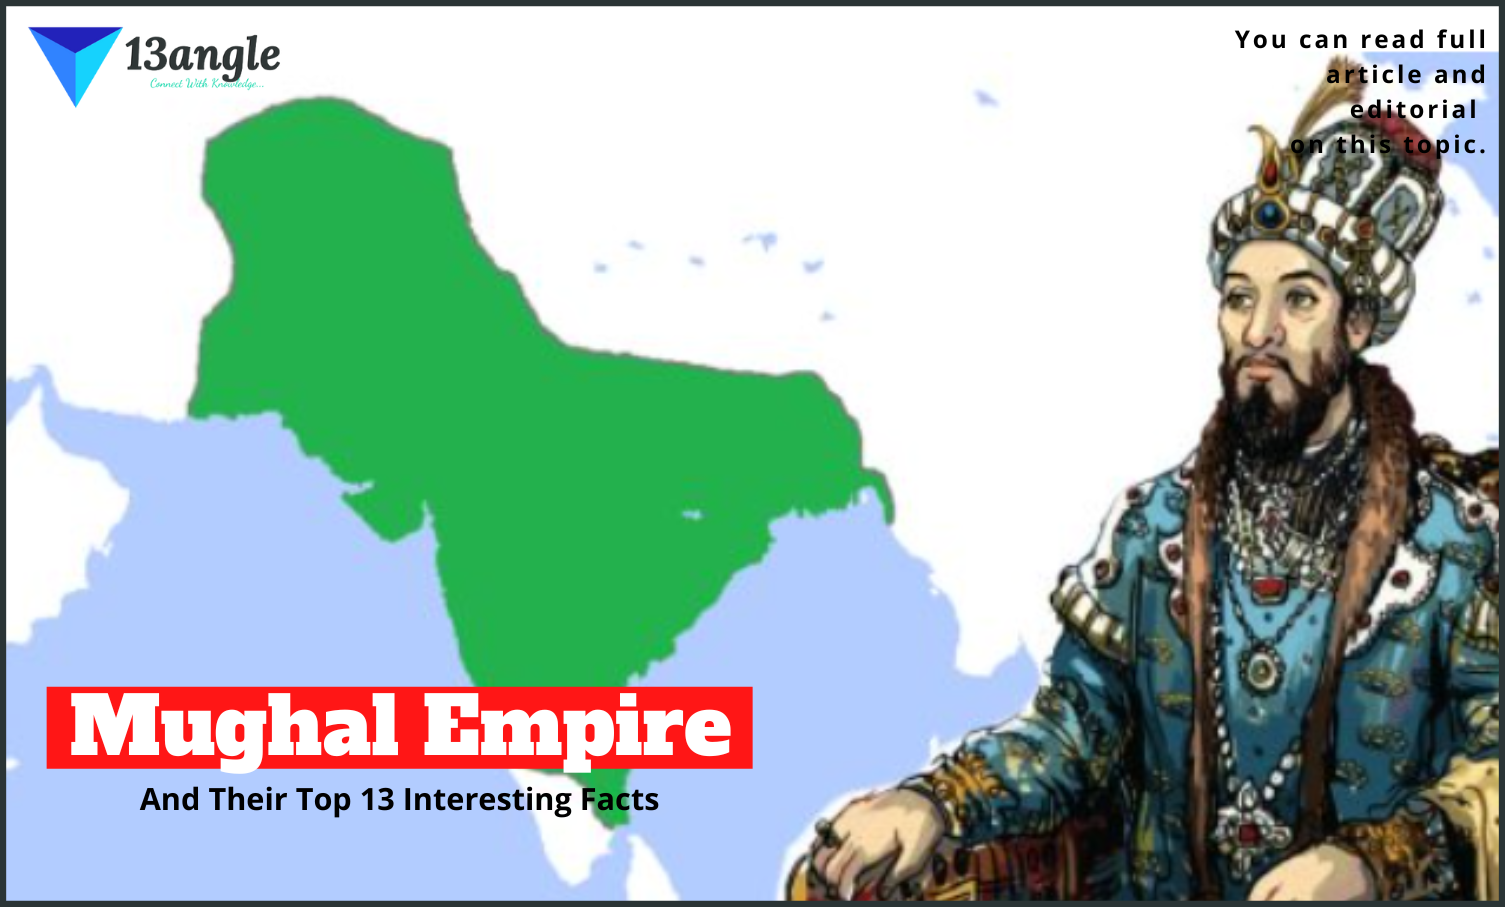 Mughal Empire and Their Top 13 Interesting Facts- 13angle.com